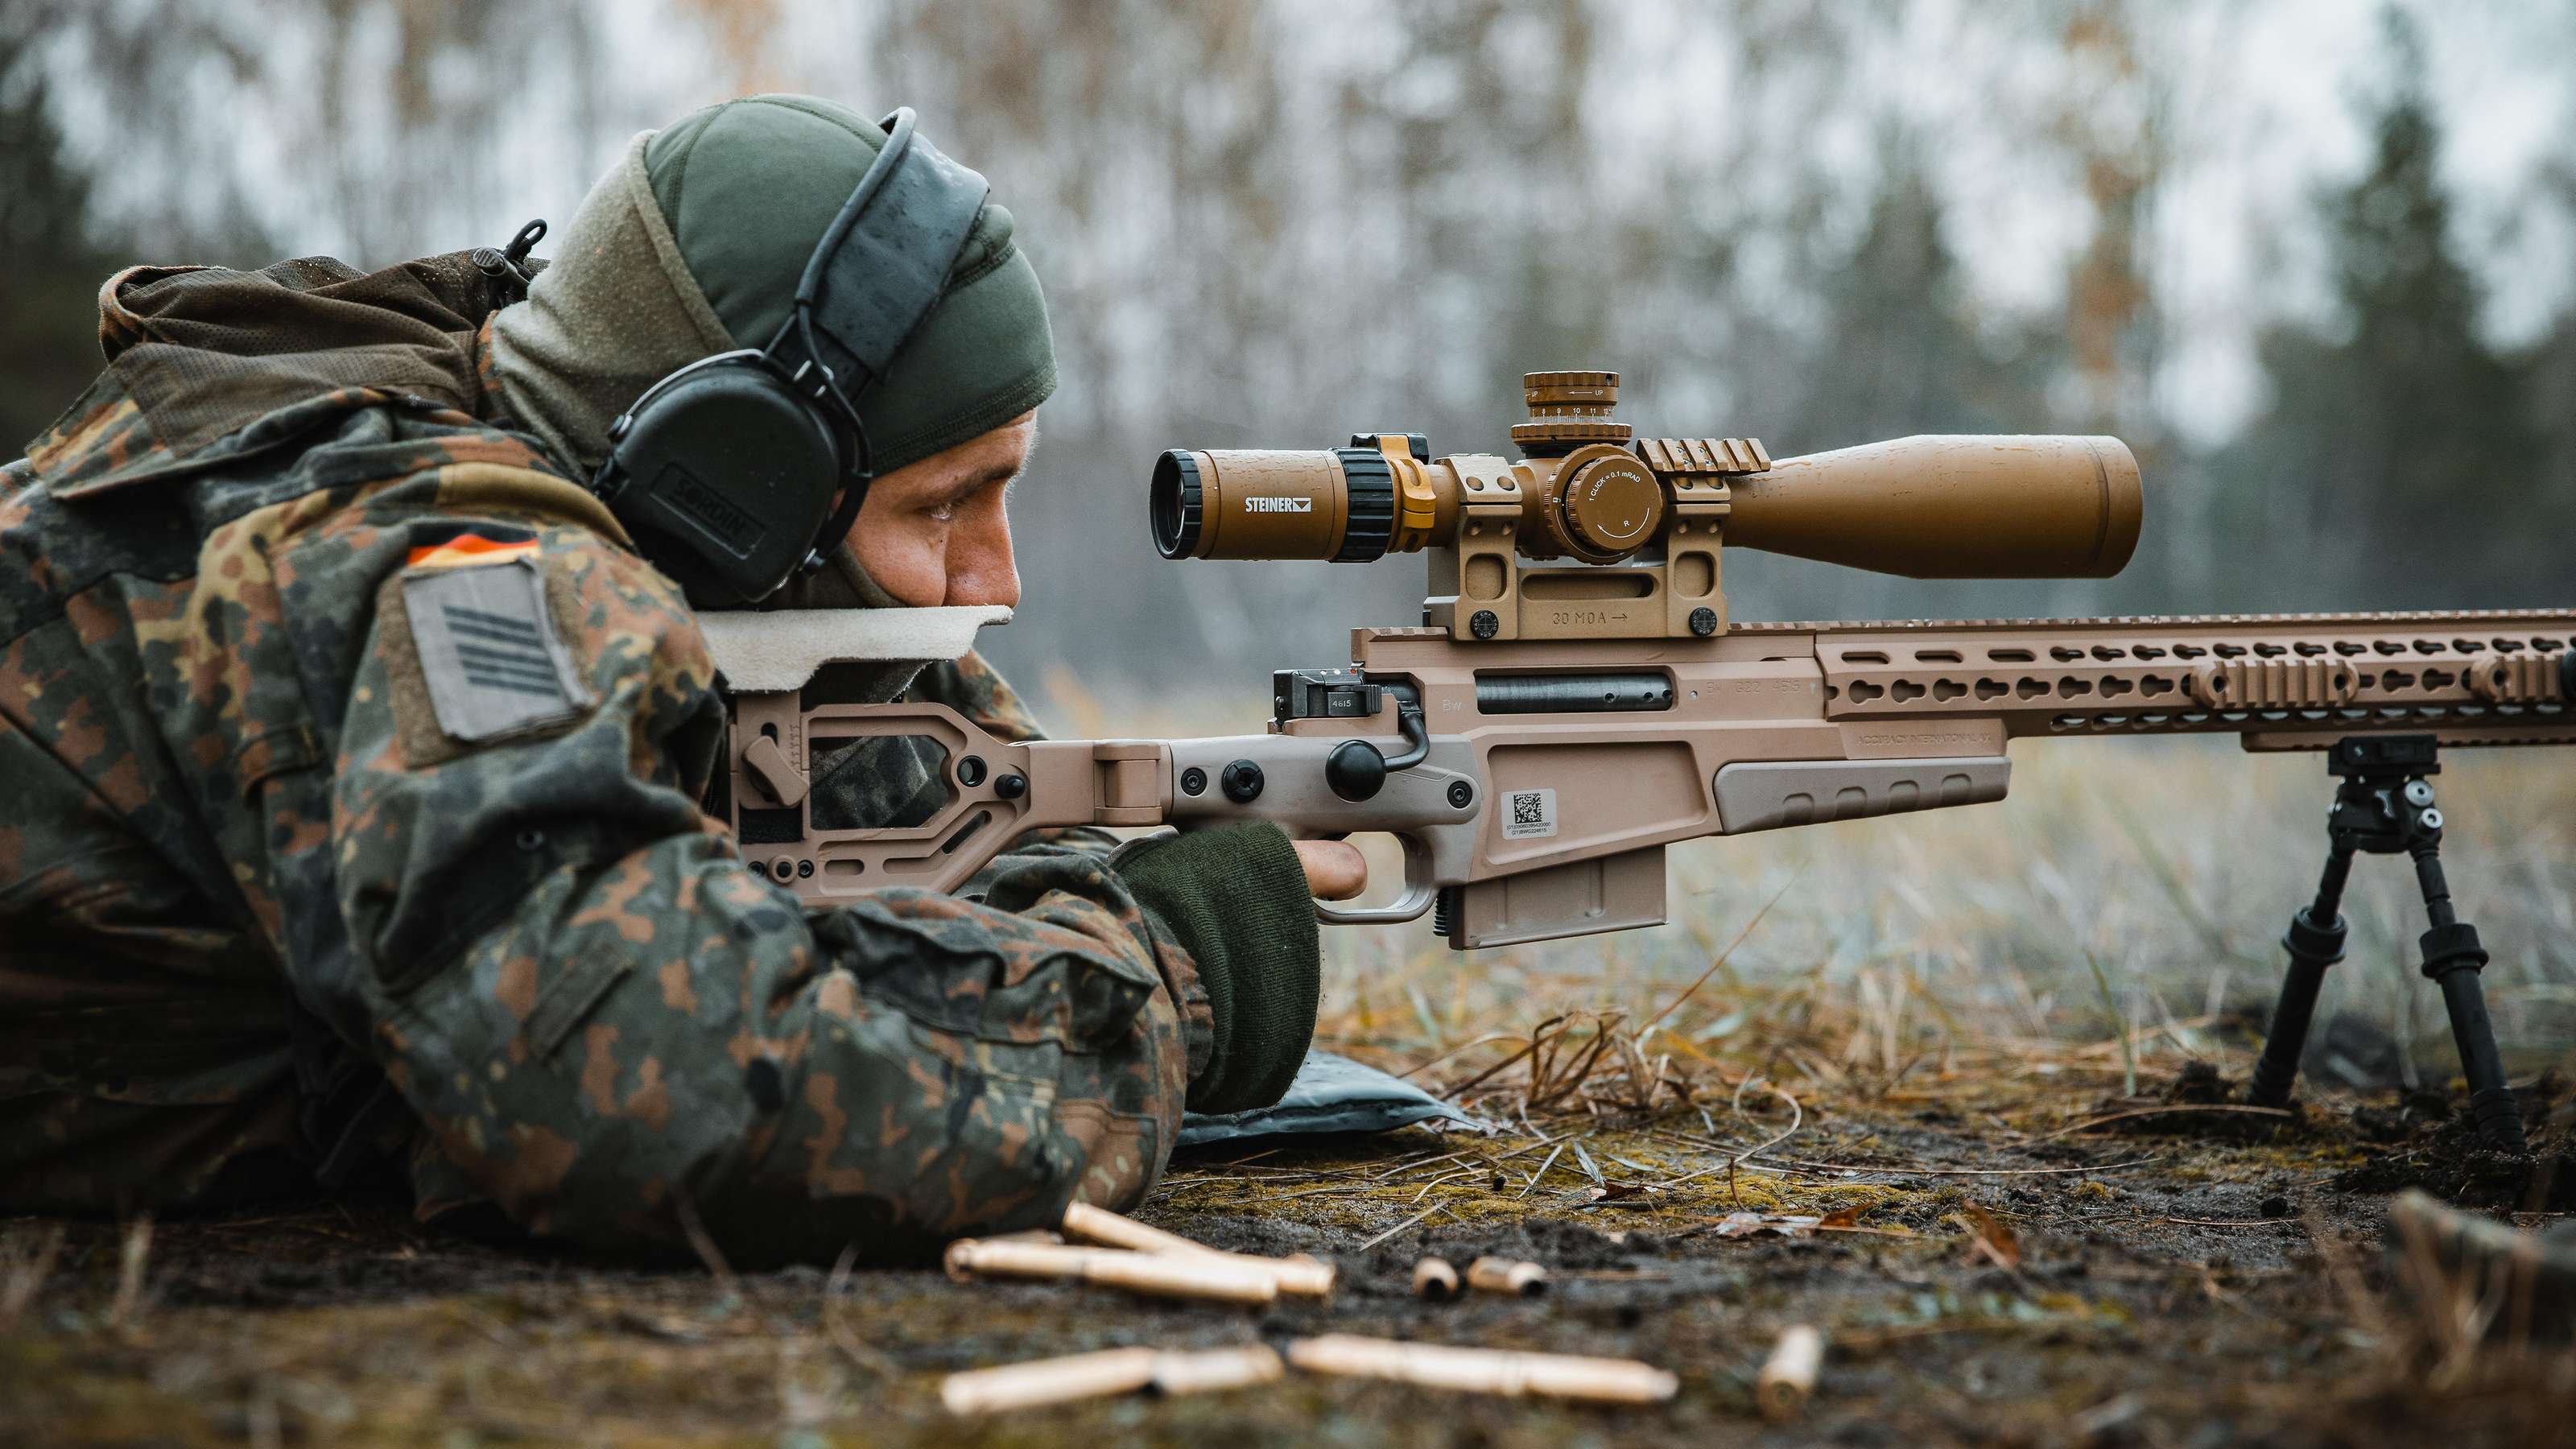 What Does a Sniper Really Do? - The Sniper